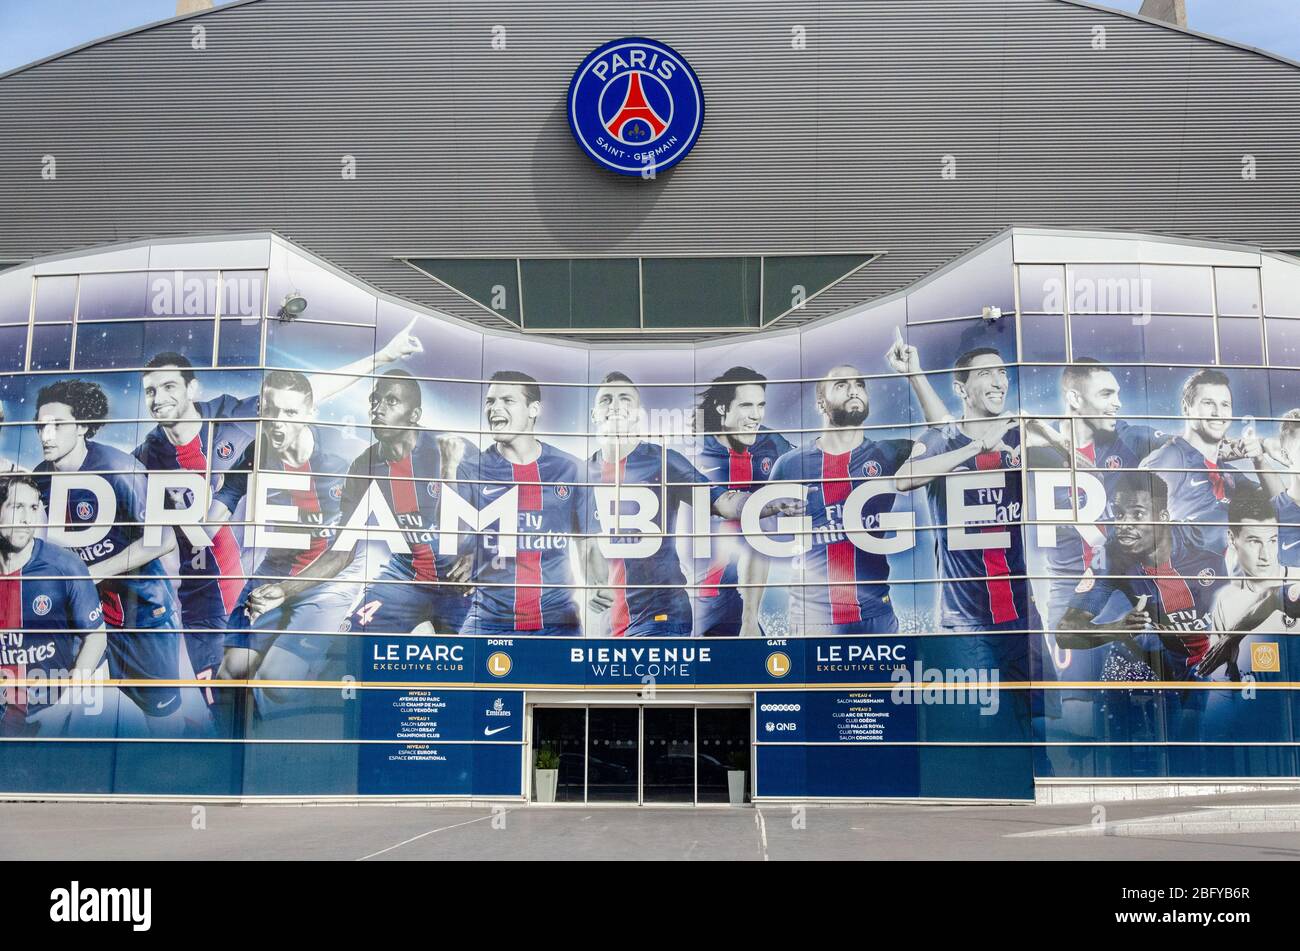 Parc des Princes Football Stadium which is home of Paris Saint-Germain Football Club, sporting a deserted look with shut entry gate in Paris, France Stock Photo